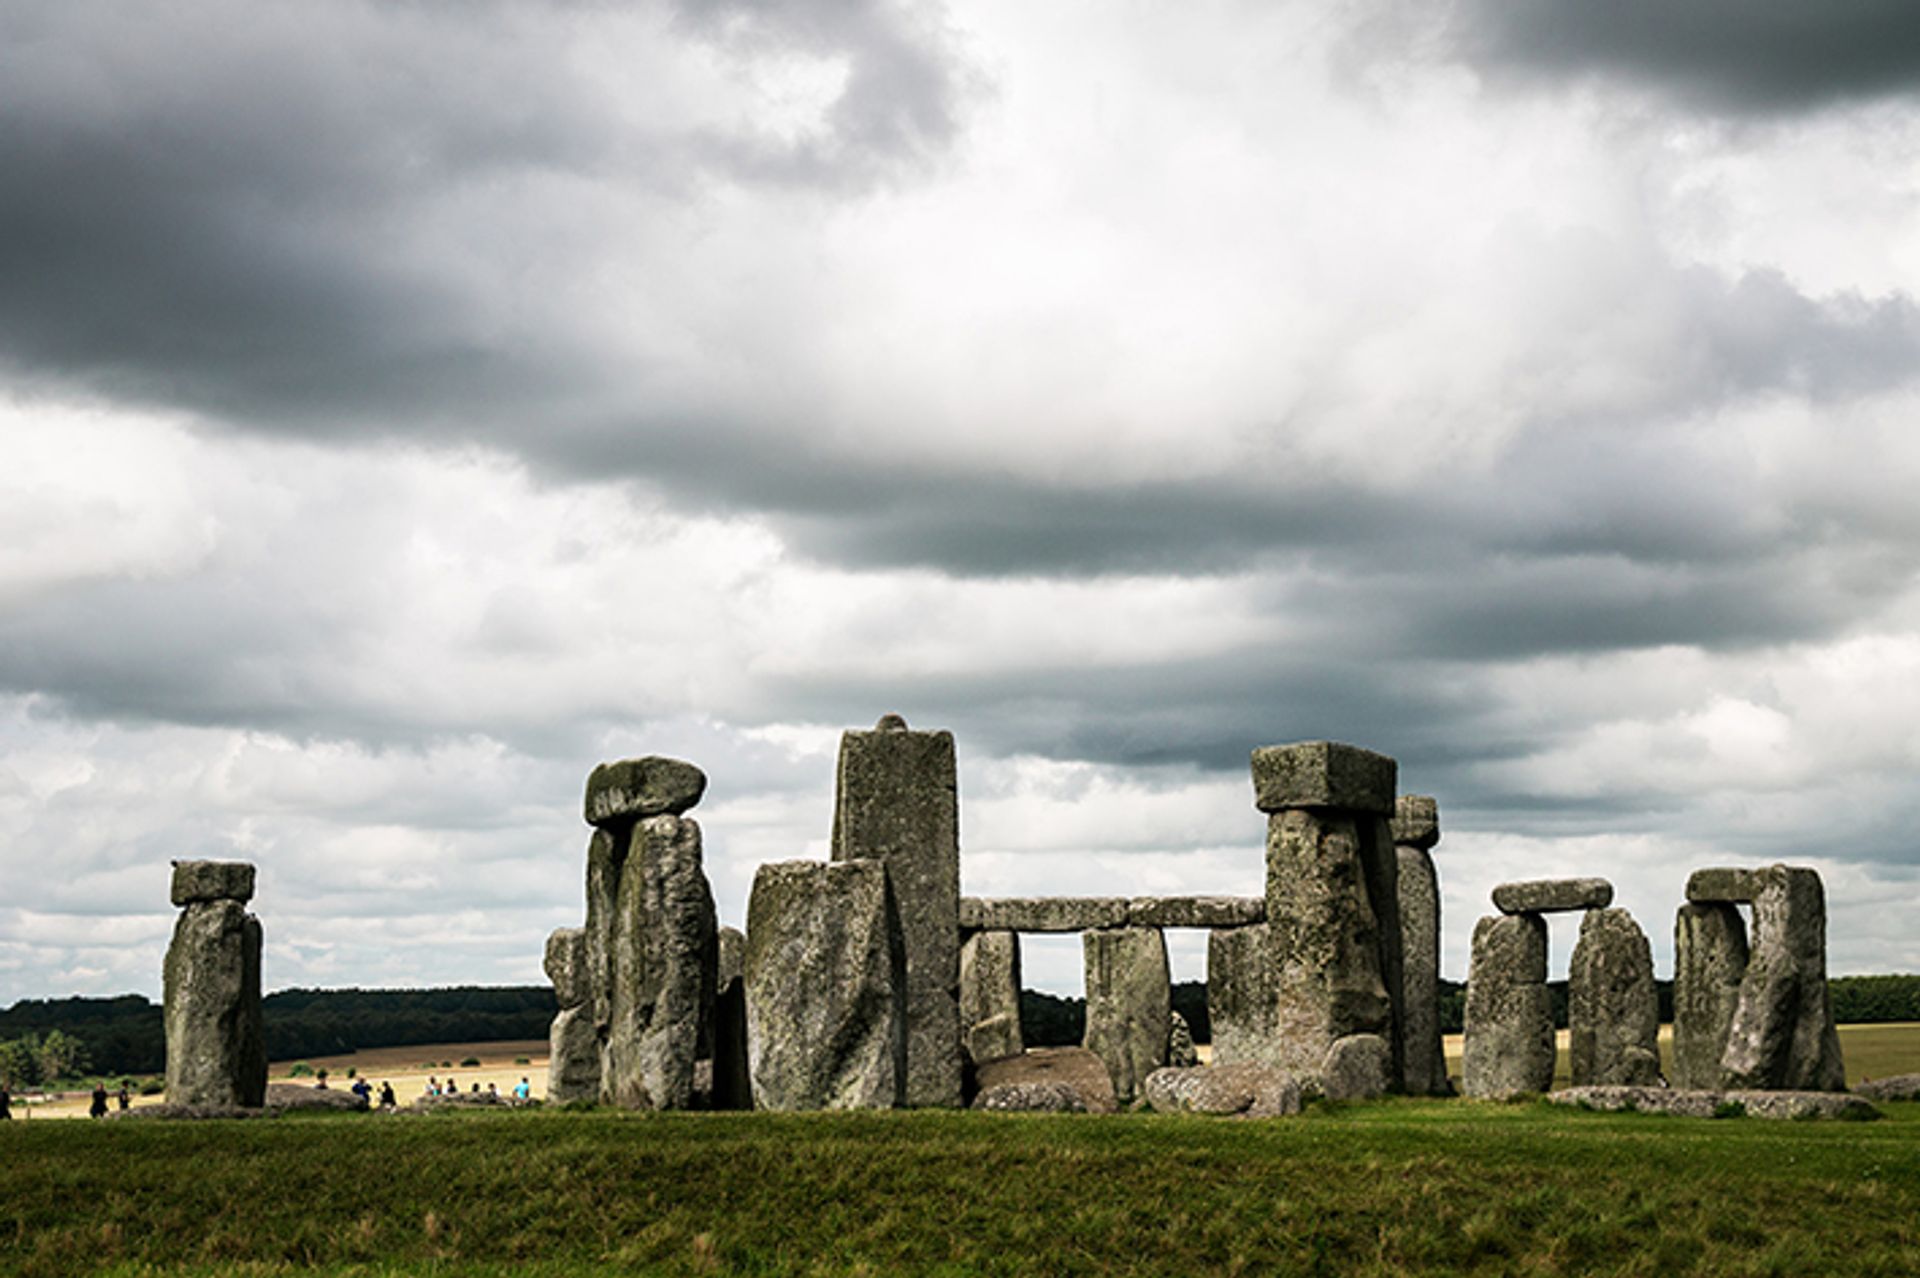 The tunnel was intended to divert traffic from the ancient site of Stonehenge © Inja Pavlić